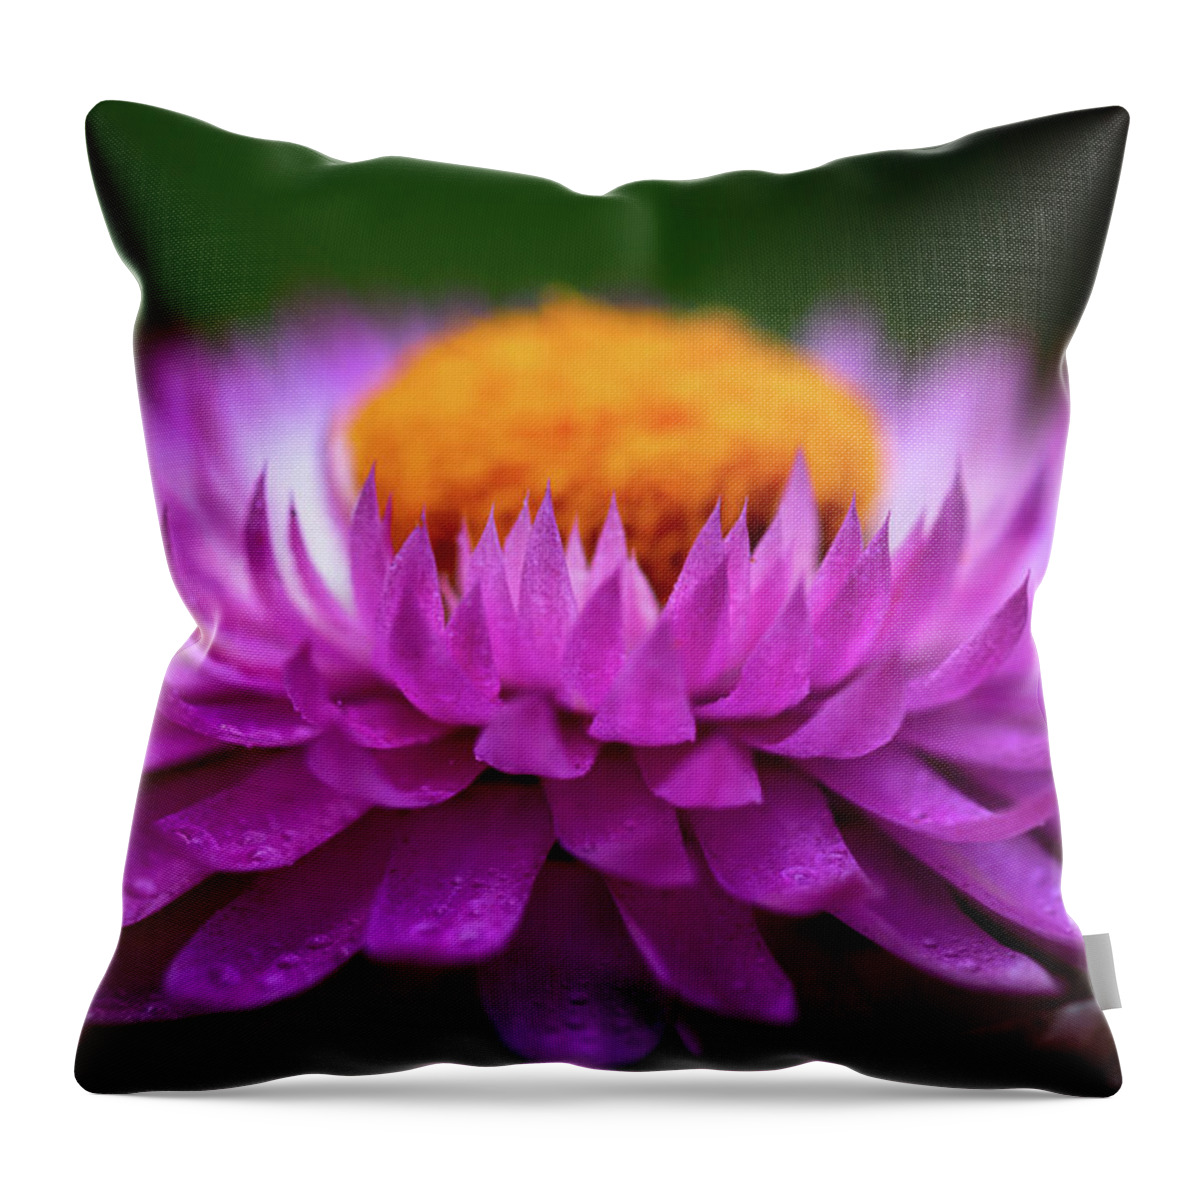 Flower Throw Pillow featuring the photograph Everlasting by Carrie Hannigan